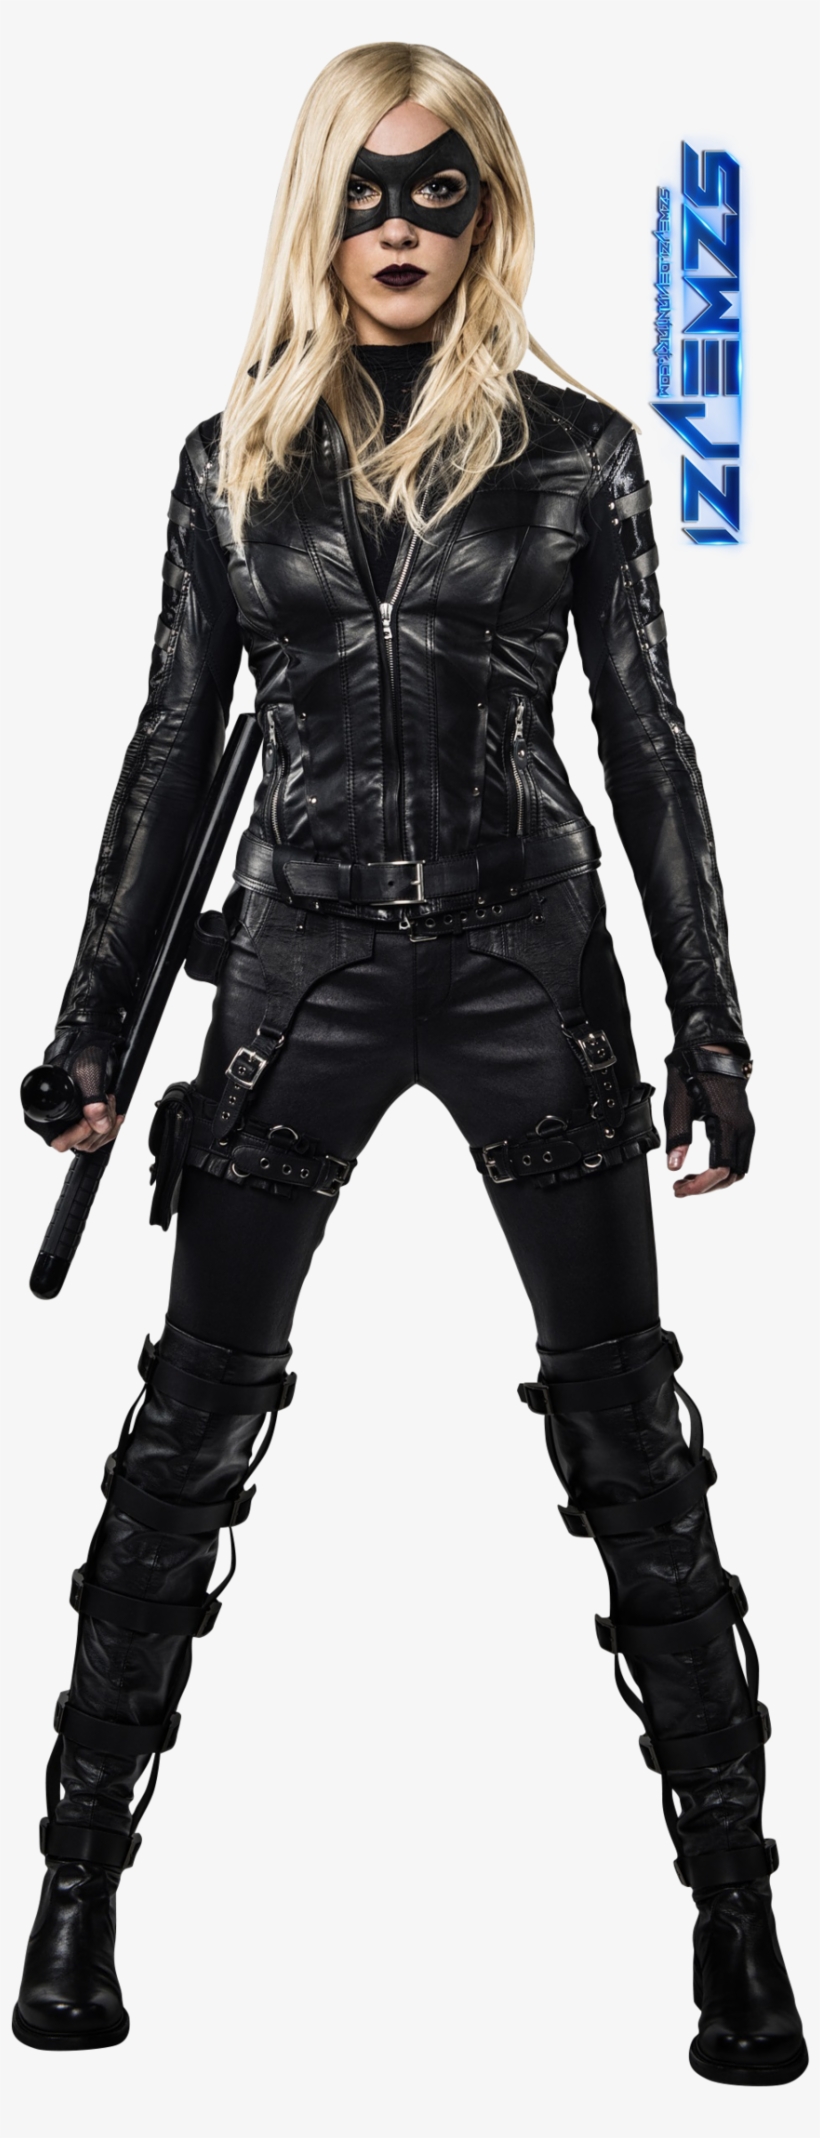 Arrow Black Canary By Szwejzi - Black Canary Laurel Png, transparent png #1864213